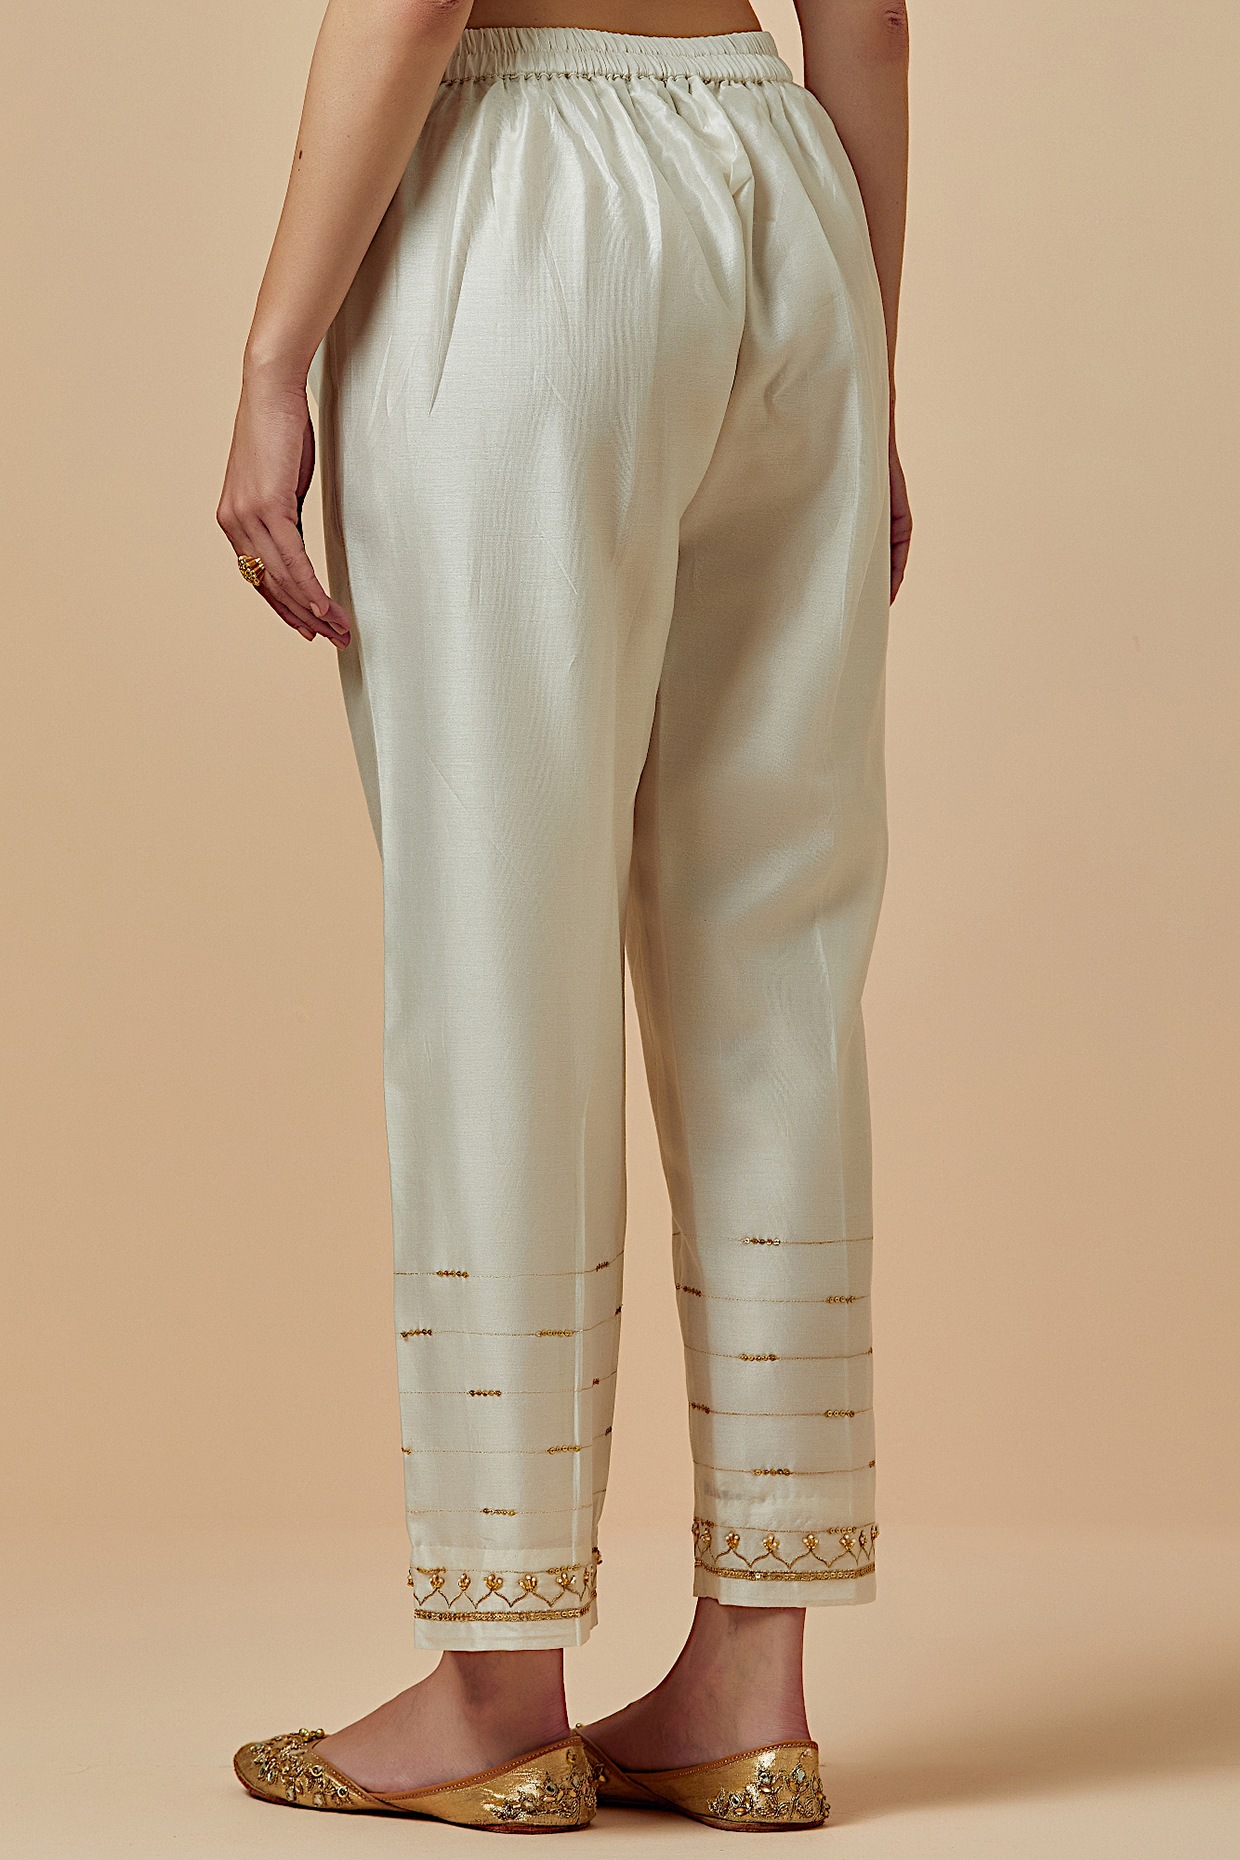 Tory Heart Embroidered Pants